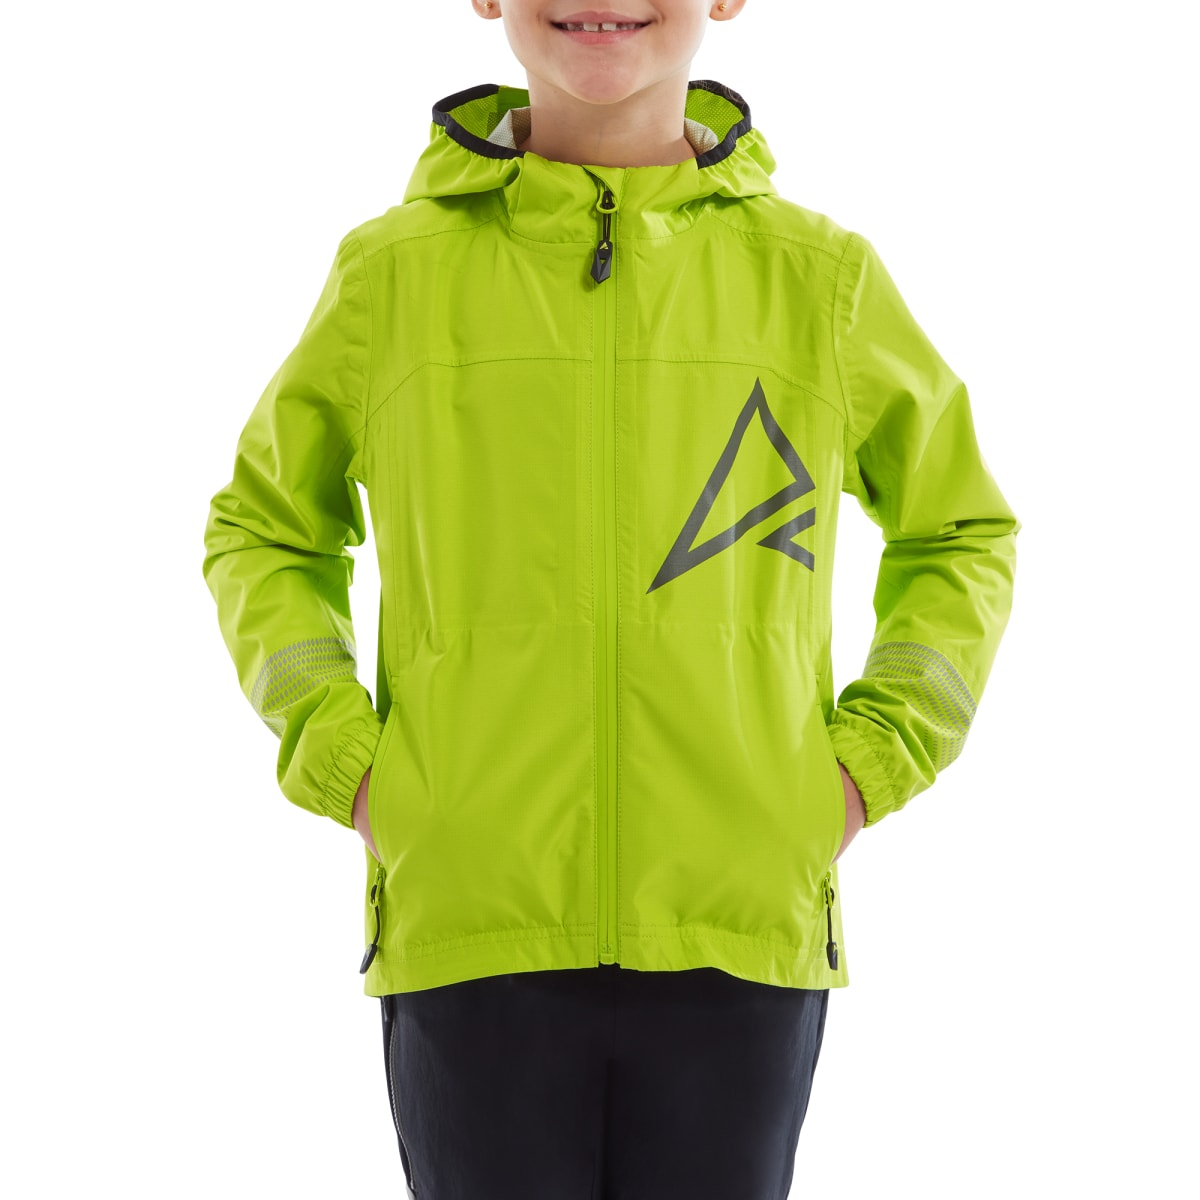 Altura  Spark Kids Waterproof Cycling Jacket 9 to 10 Years LIME